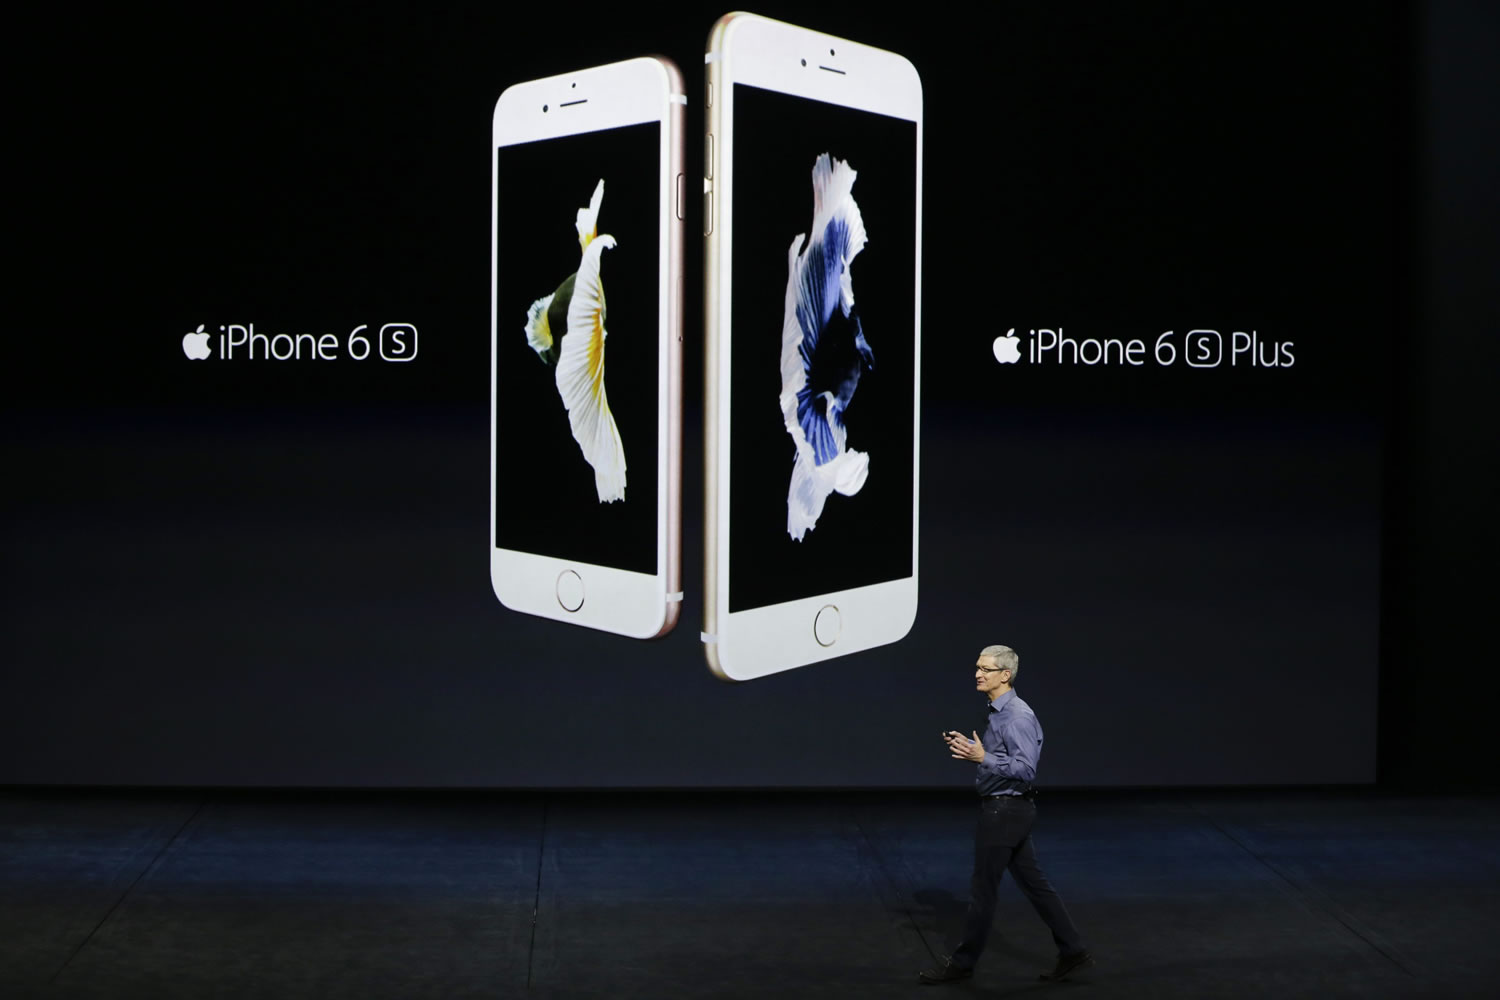 FILE - In this Wednesday, Sept. 9, 2015, file photo, Apple CEO Tim Cook discusses the new iPhone 6s and iPhone 6s Plus during the Apple event at the Bill Graham Civic Auditorium in San Francisco. Most analysts believe Apple surpassed its own record by selling more than 74.5 million iPhones in the final three months of 2015. But there are signs that iPhone sales in the first three months of 2016 will show an abrupt decline from the same period a year earlier.